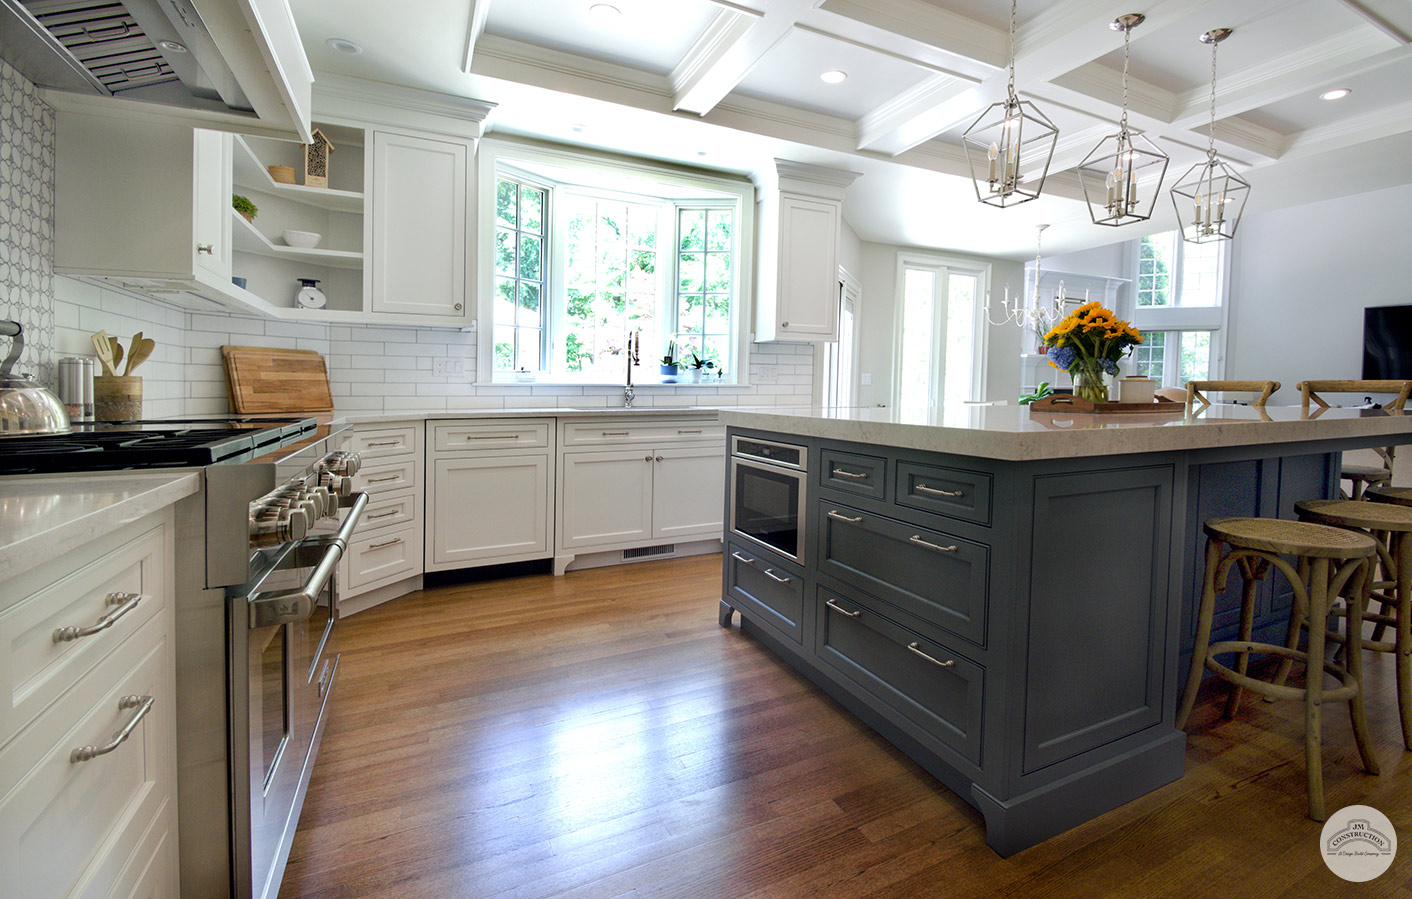 A perfect kitchen to host